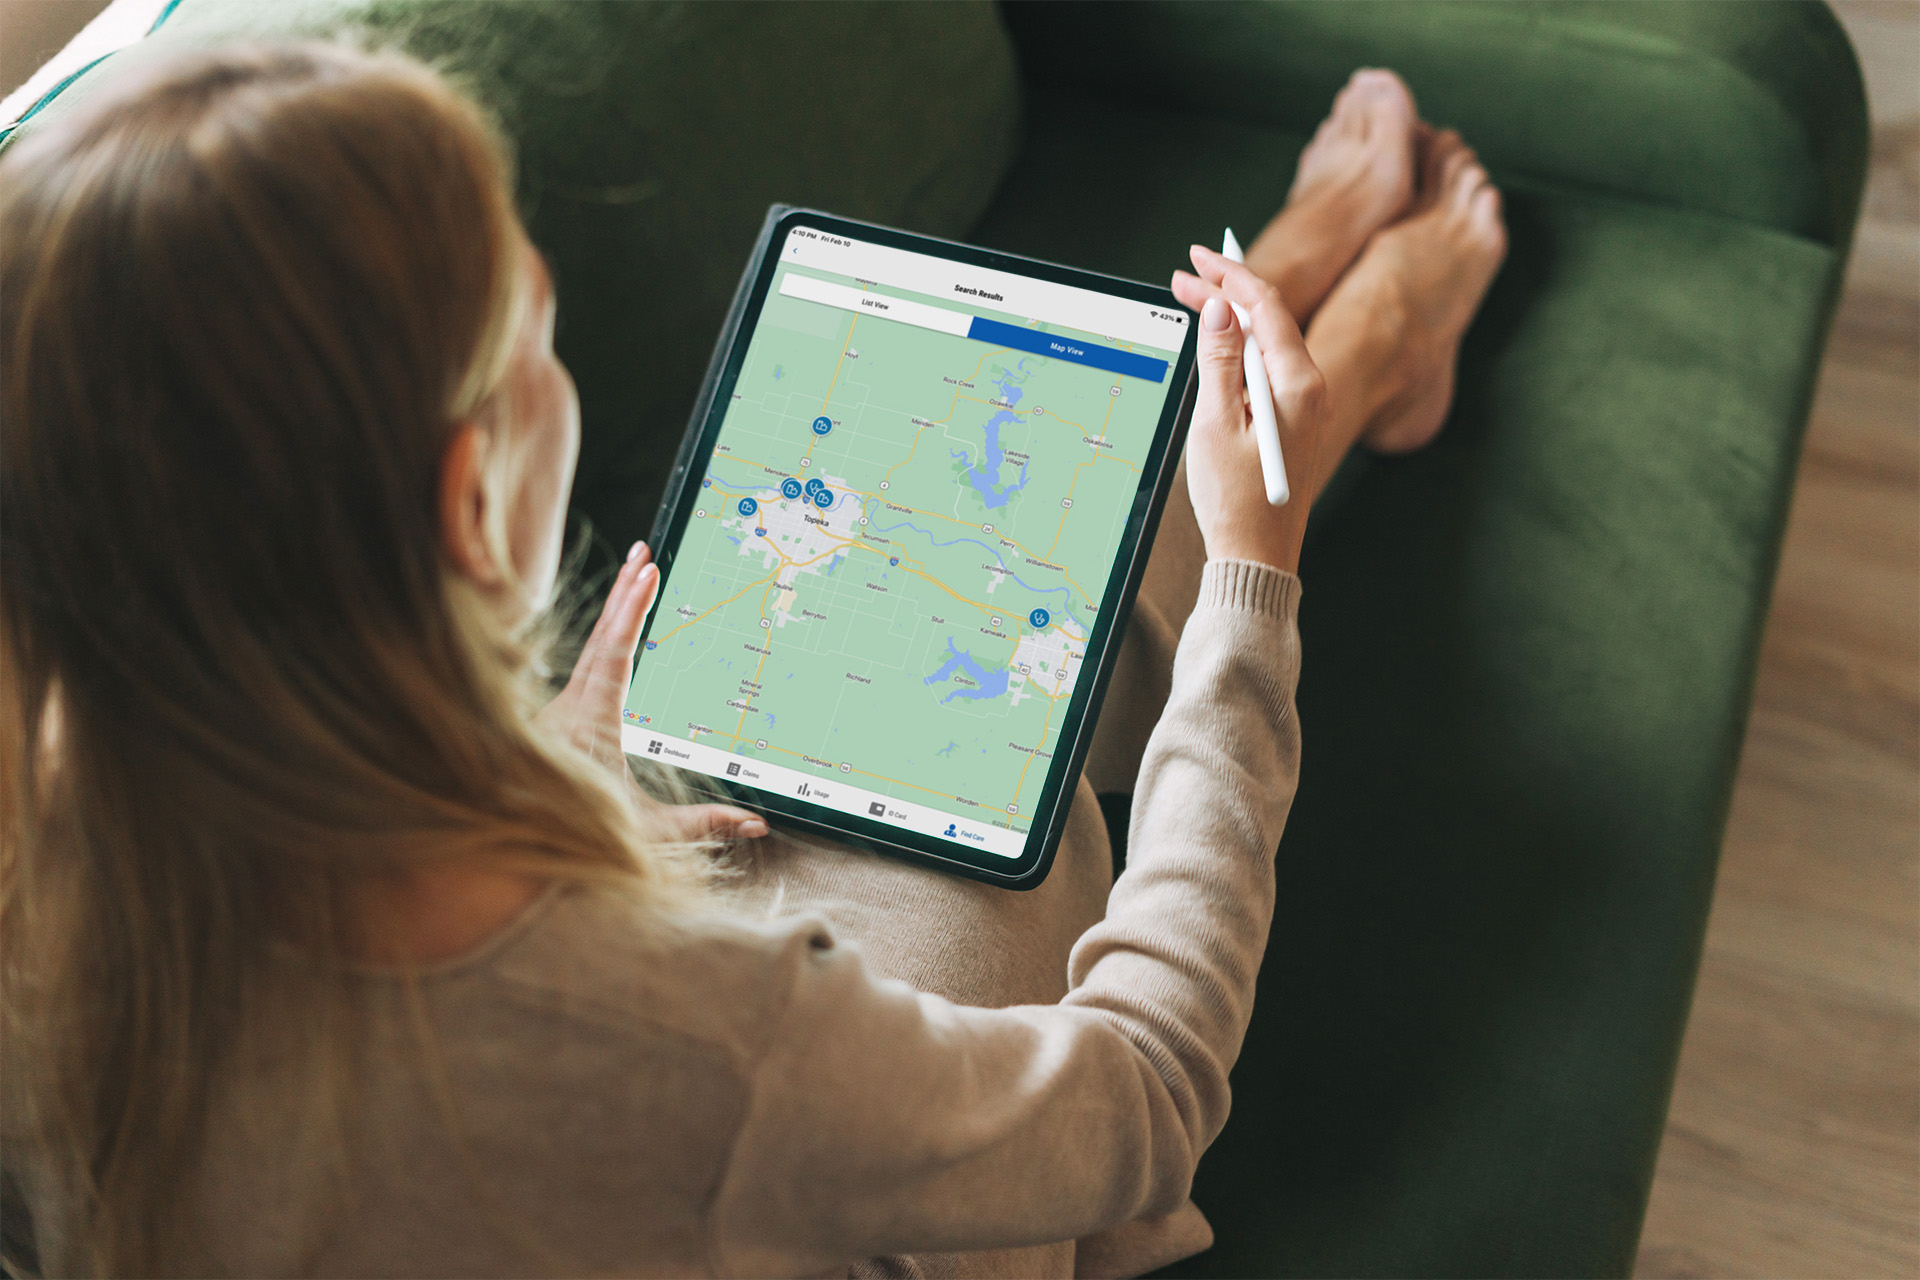 Woman views provider locations nearby on a map.